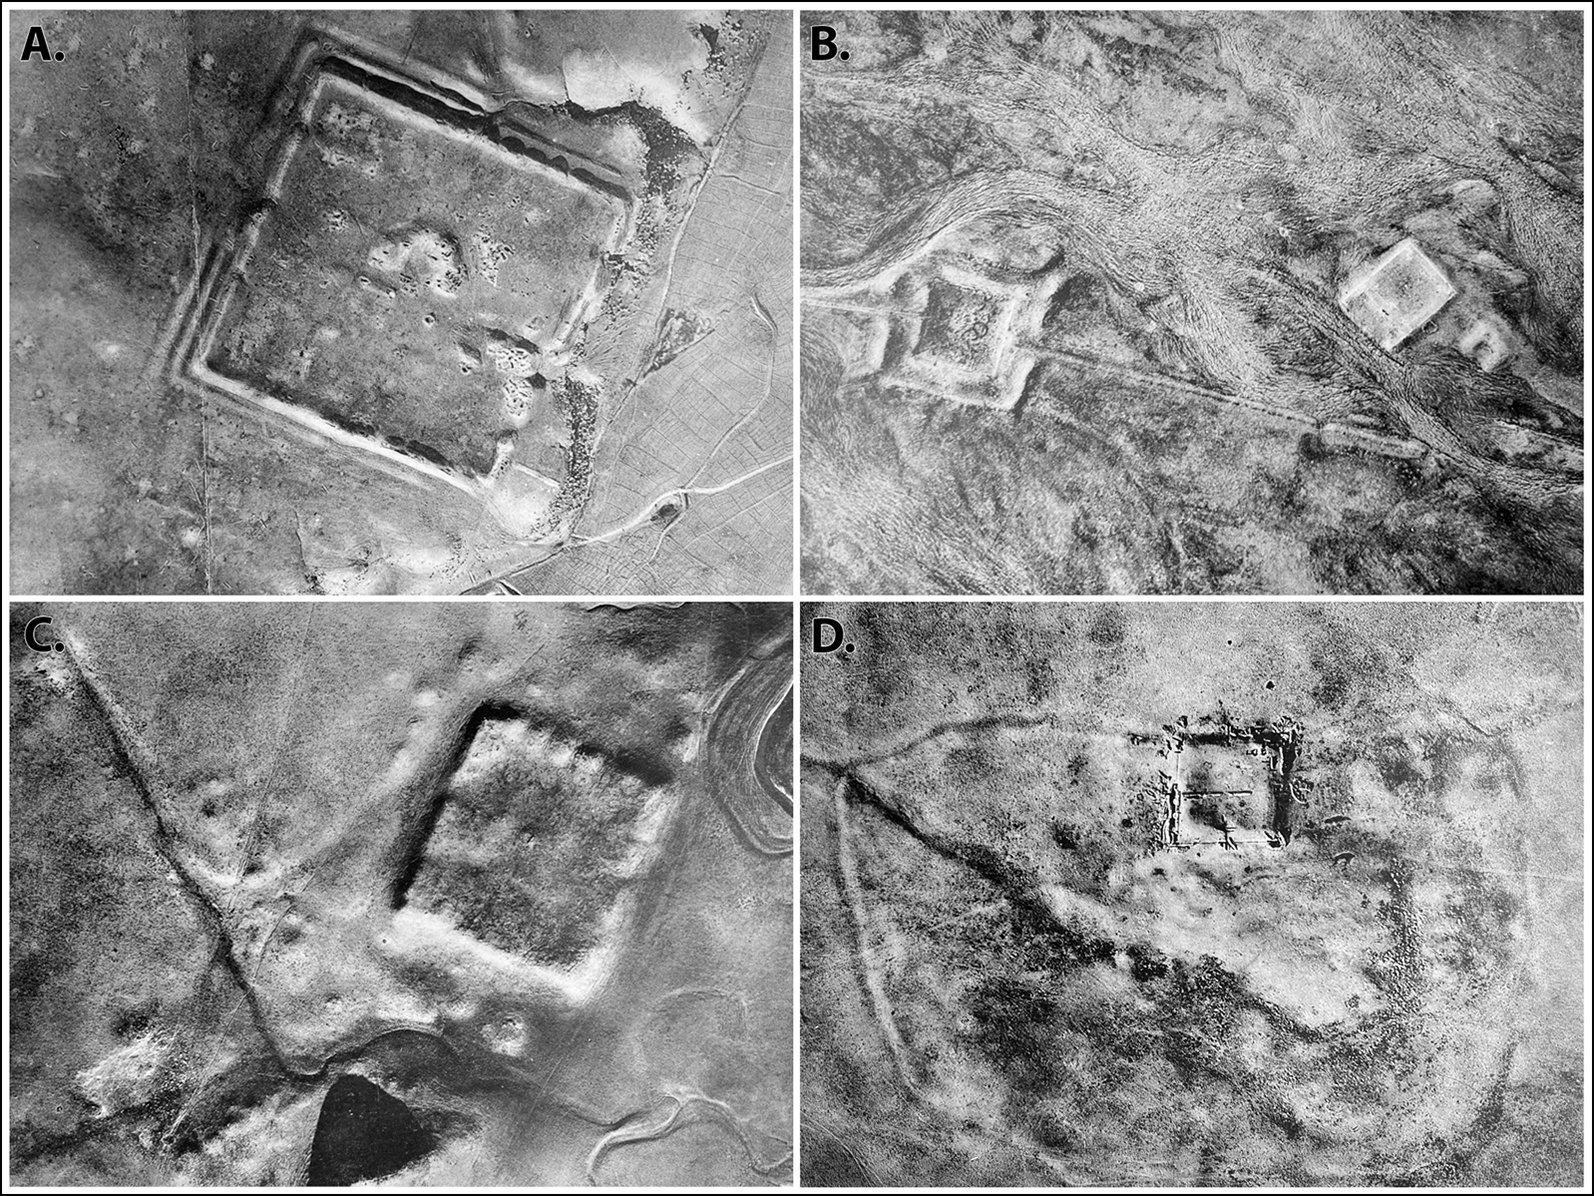 black and white images of the desert floor showing large rectangular structures